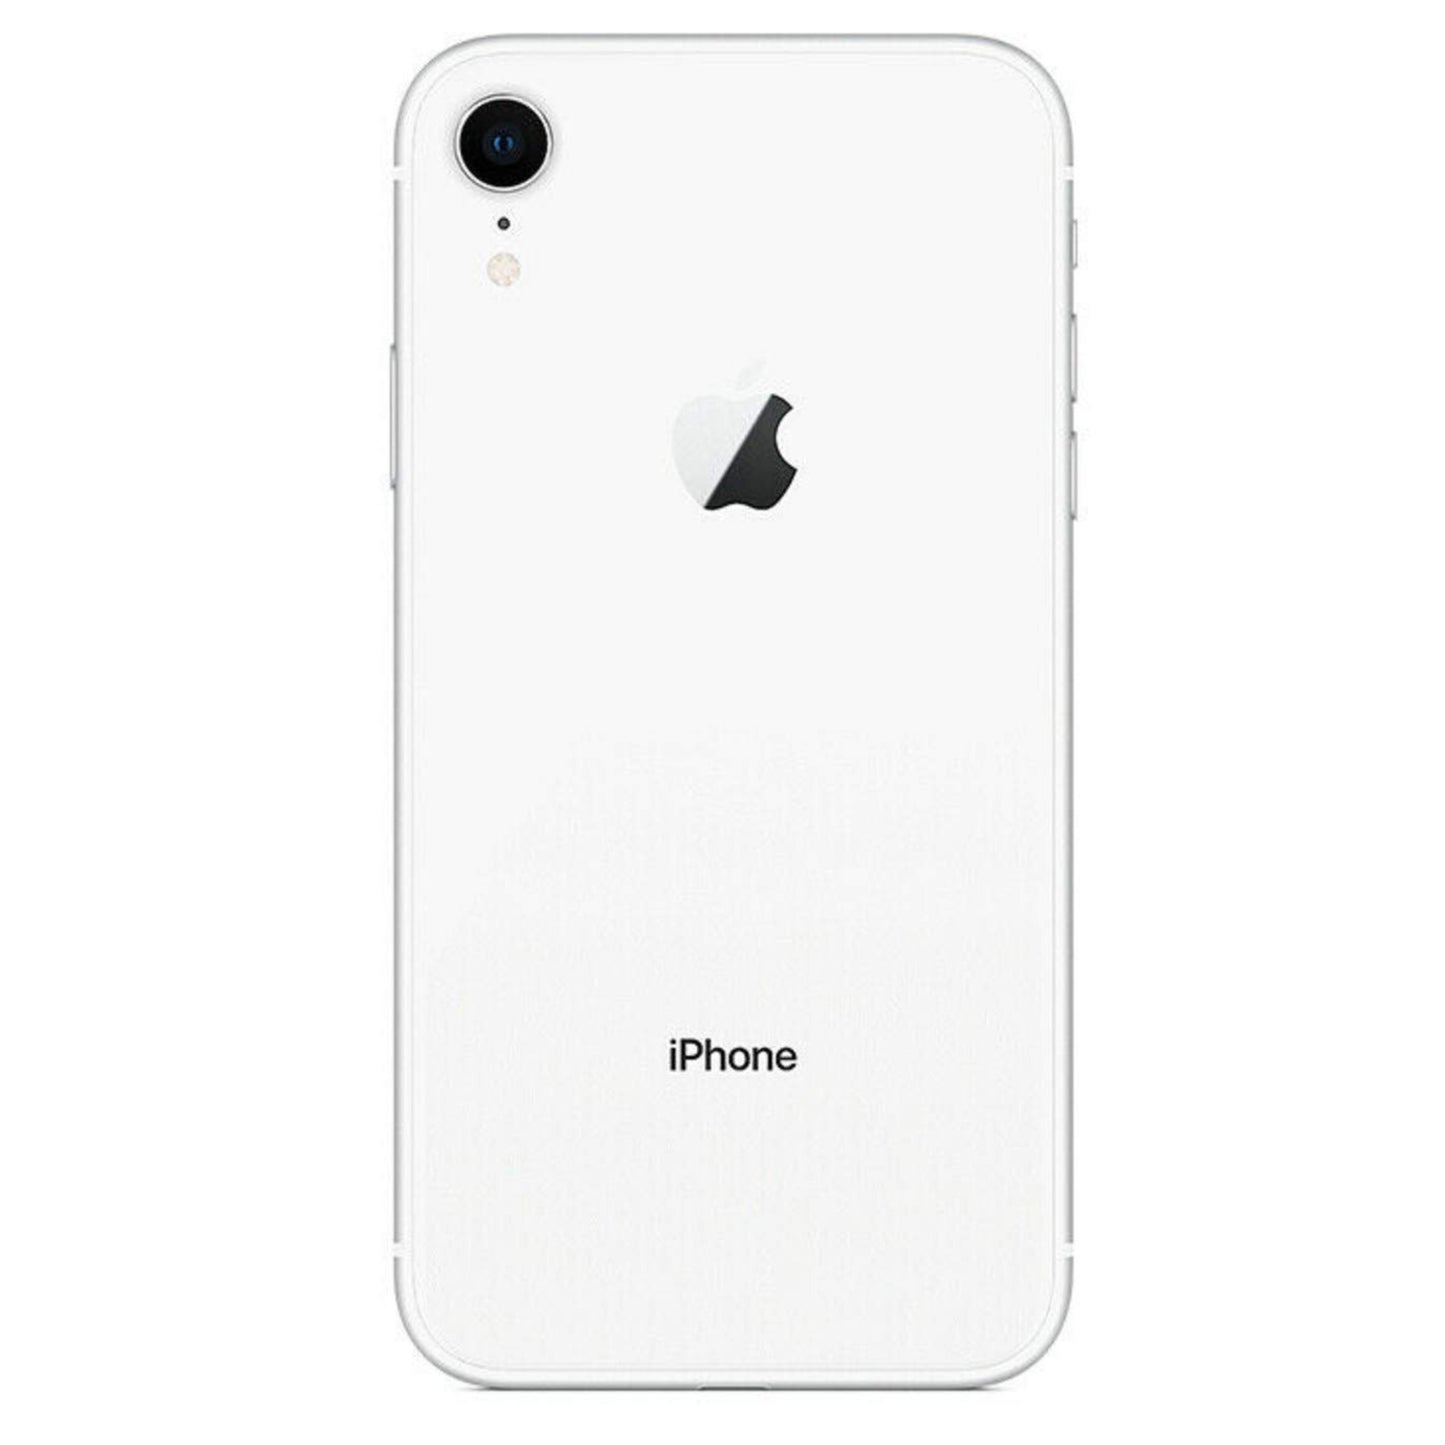 iPhone XR White 64GB (Unlocked) Pre-Owned